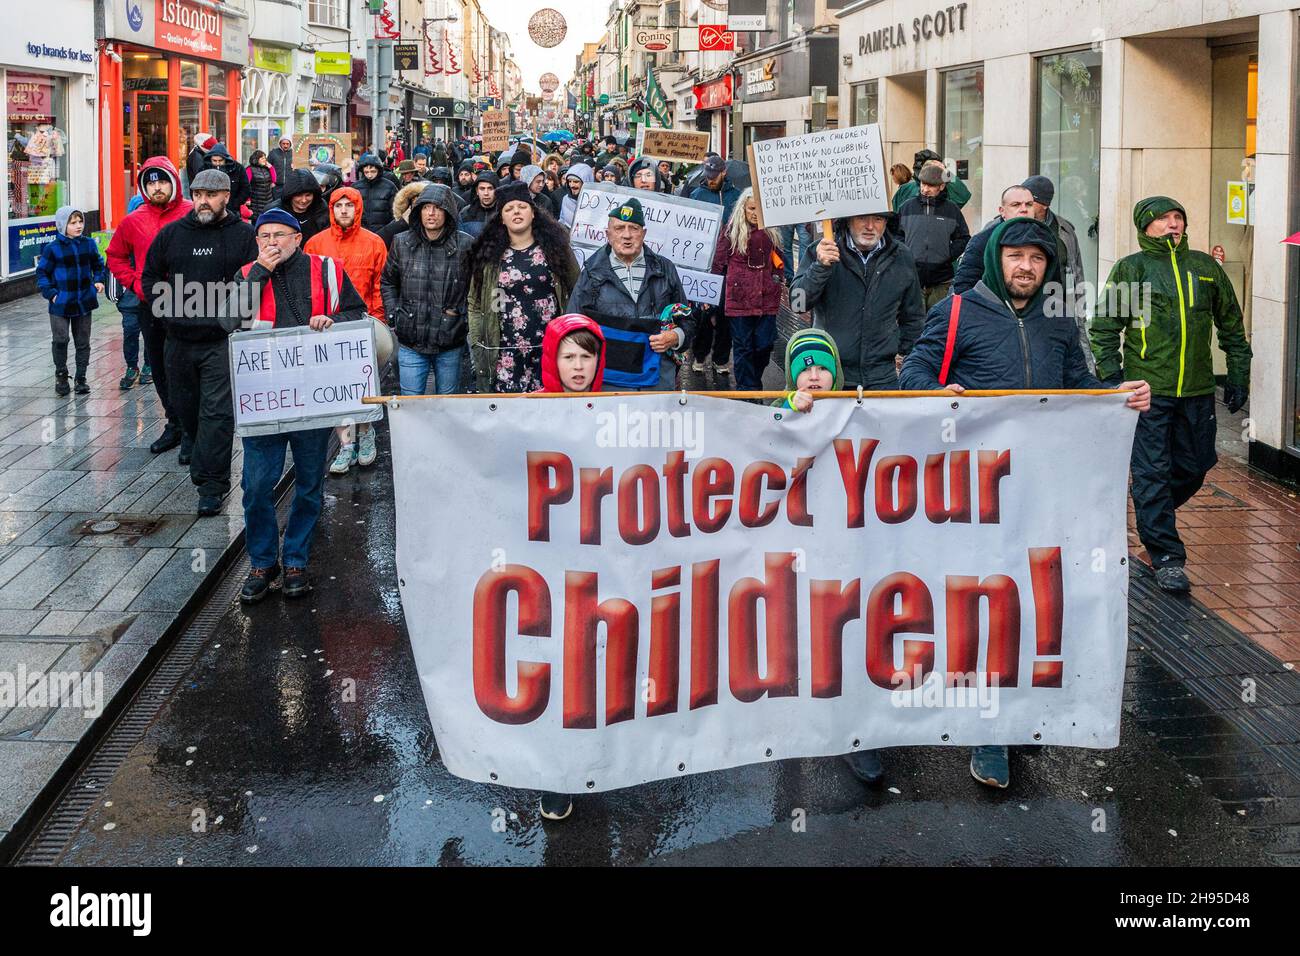 Cork, Ireland. 4th Dec, 2021. Around 500 people held a protest in Cork city today against lockdown; vaccinations for children; vaccine passports and face masks. The protestors marched around Cork city centre chanting and waving signs. It comes as the government has imposed restrictions on hospitality and household mixing until 9th January. Credit: AG News/Alamy Live News Stock Photo